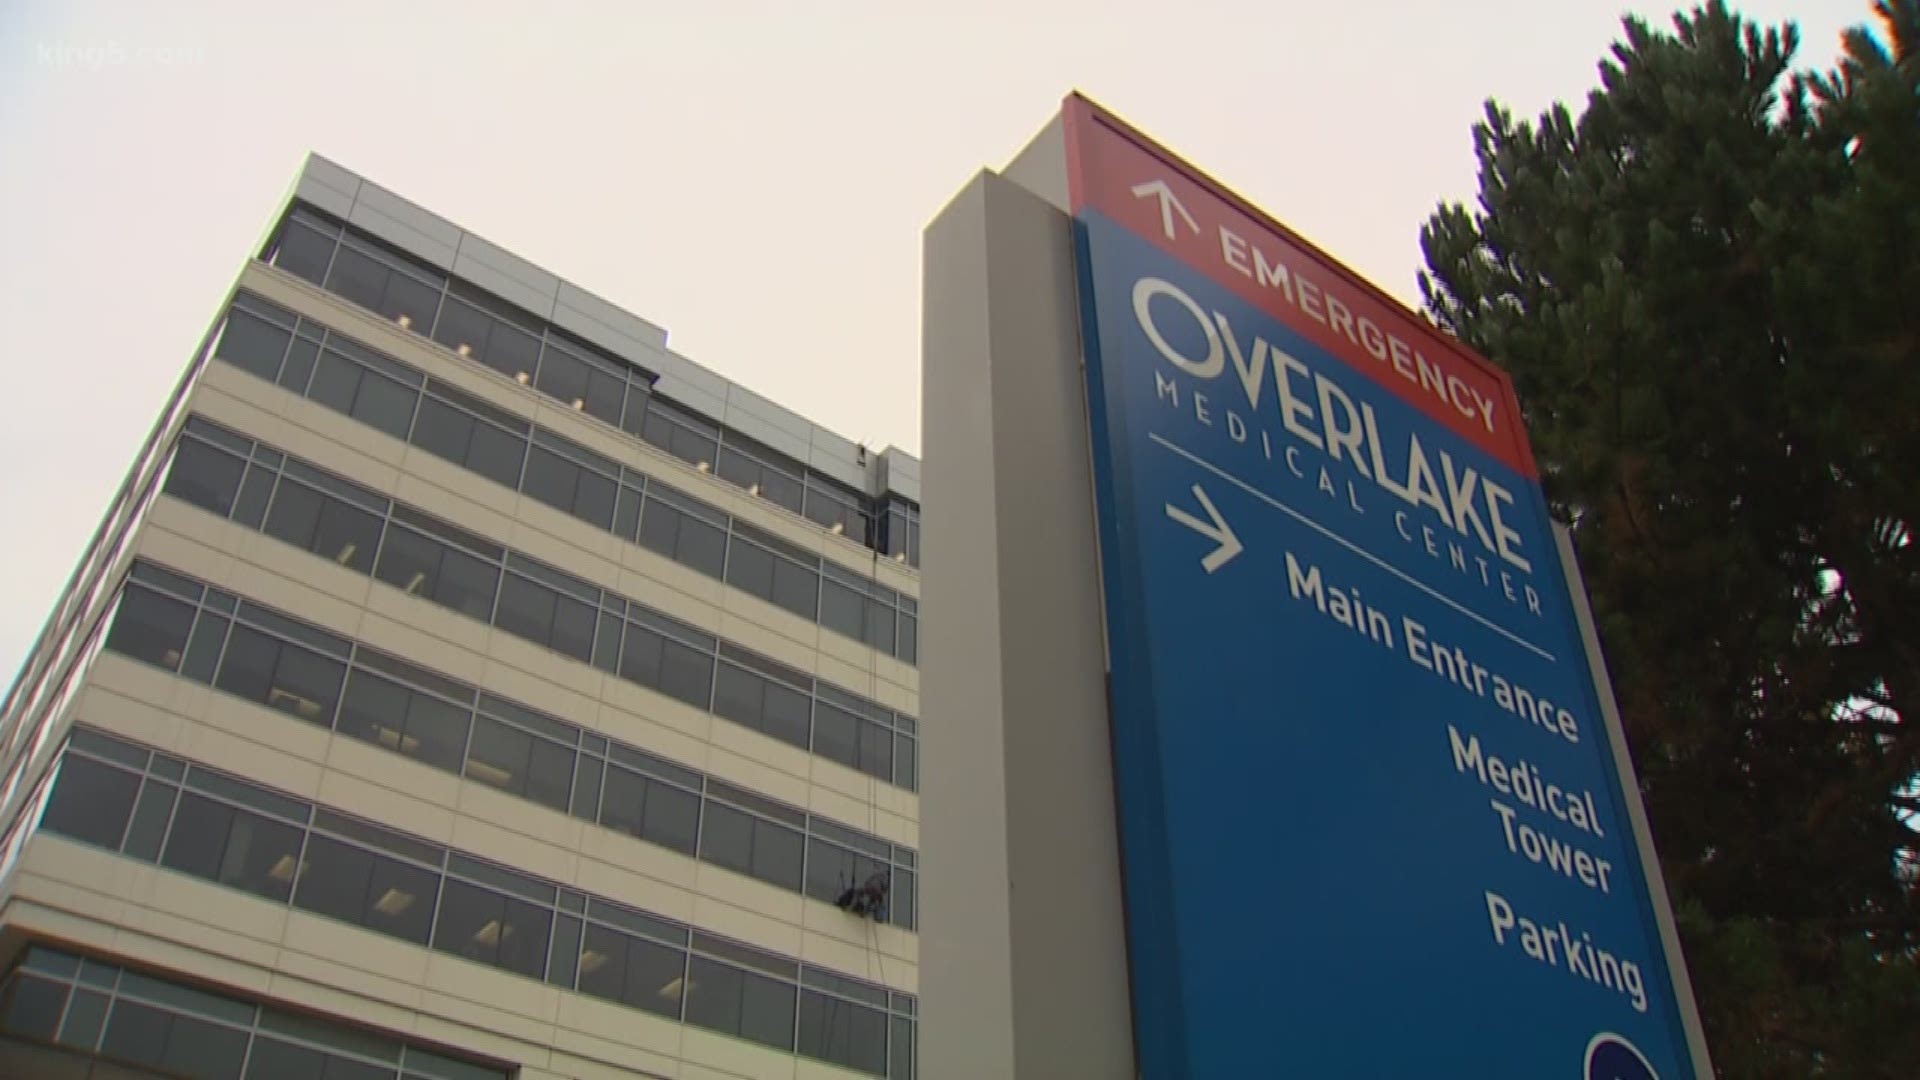 Nurses at Overlake Medical Center are collecting donations in emergency room for homeless patients.